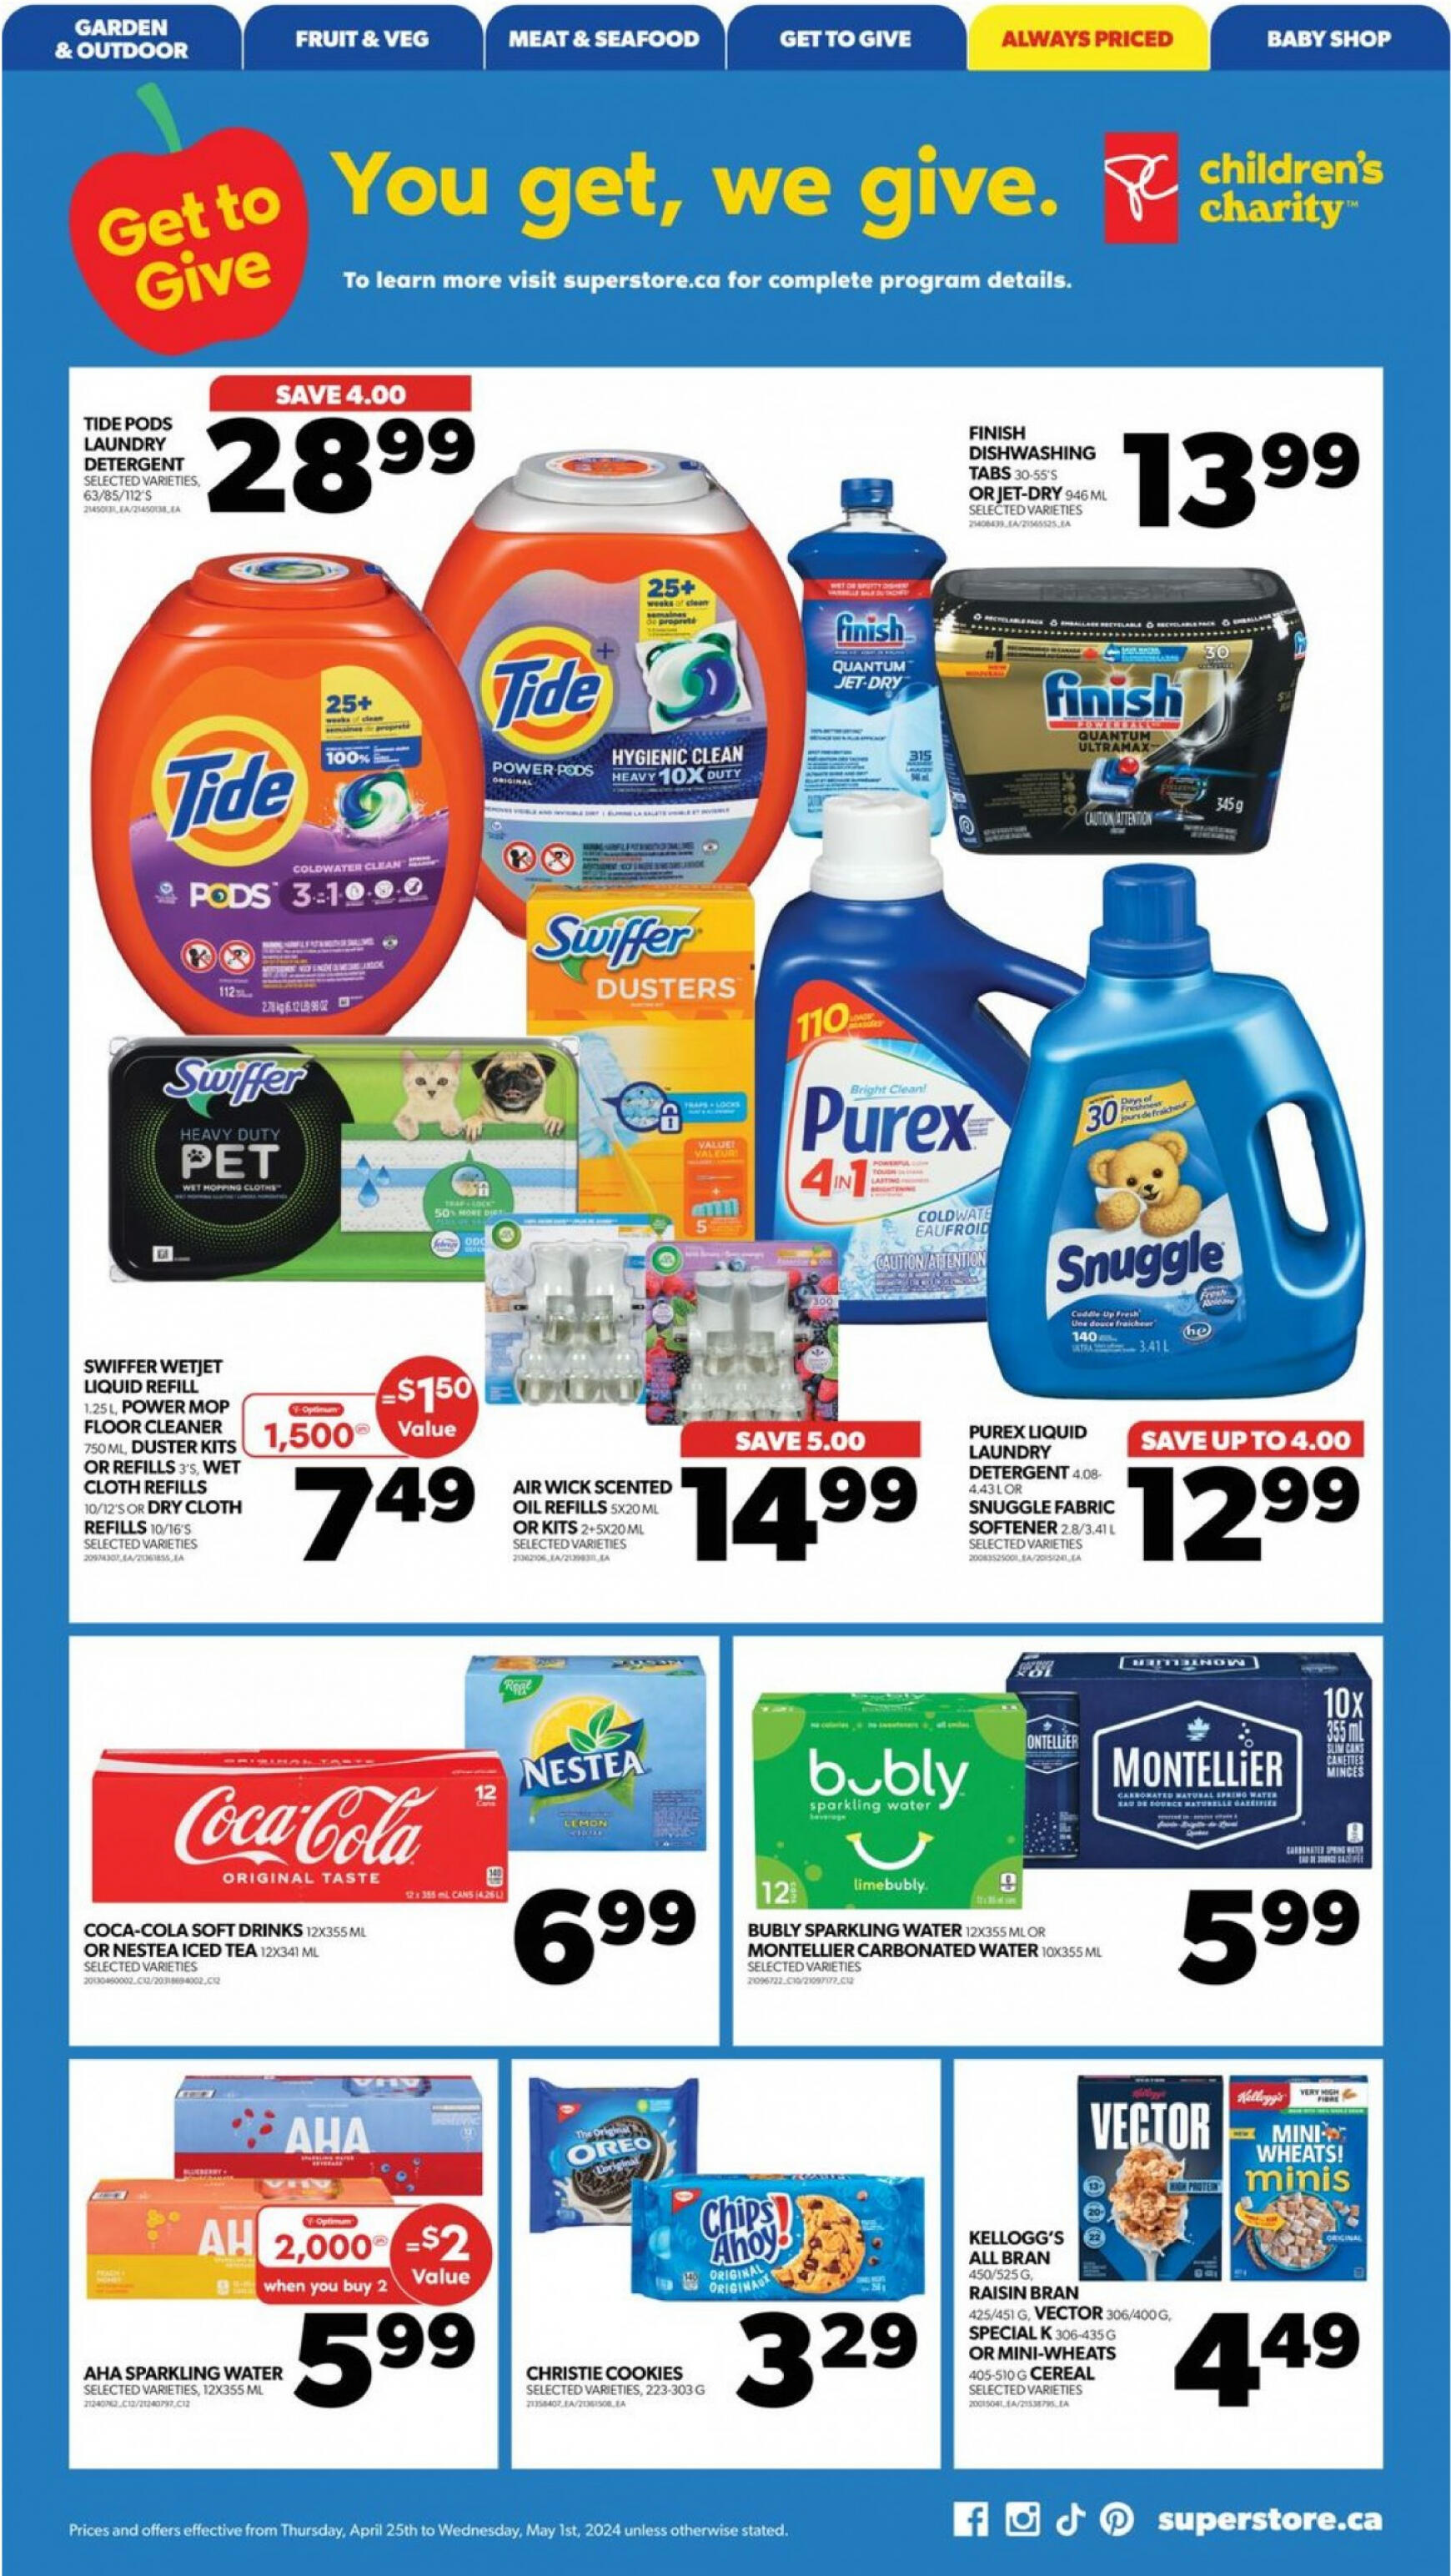 real-canadian-superstore - Real Canadian Superstore flyer current 01.05. - 31.05. - page: 14